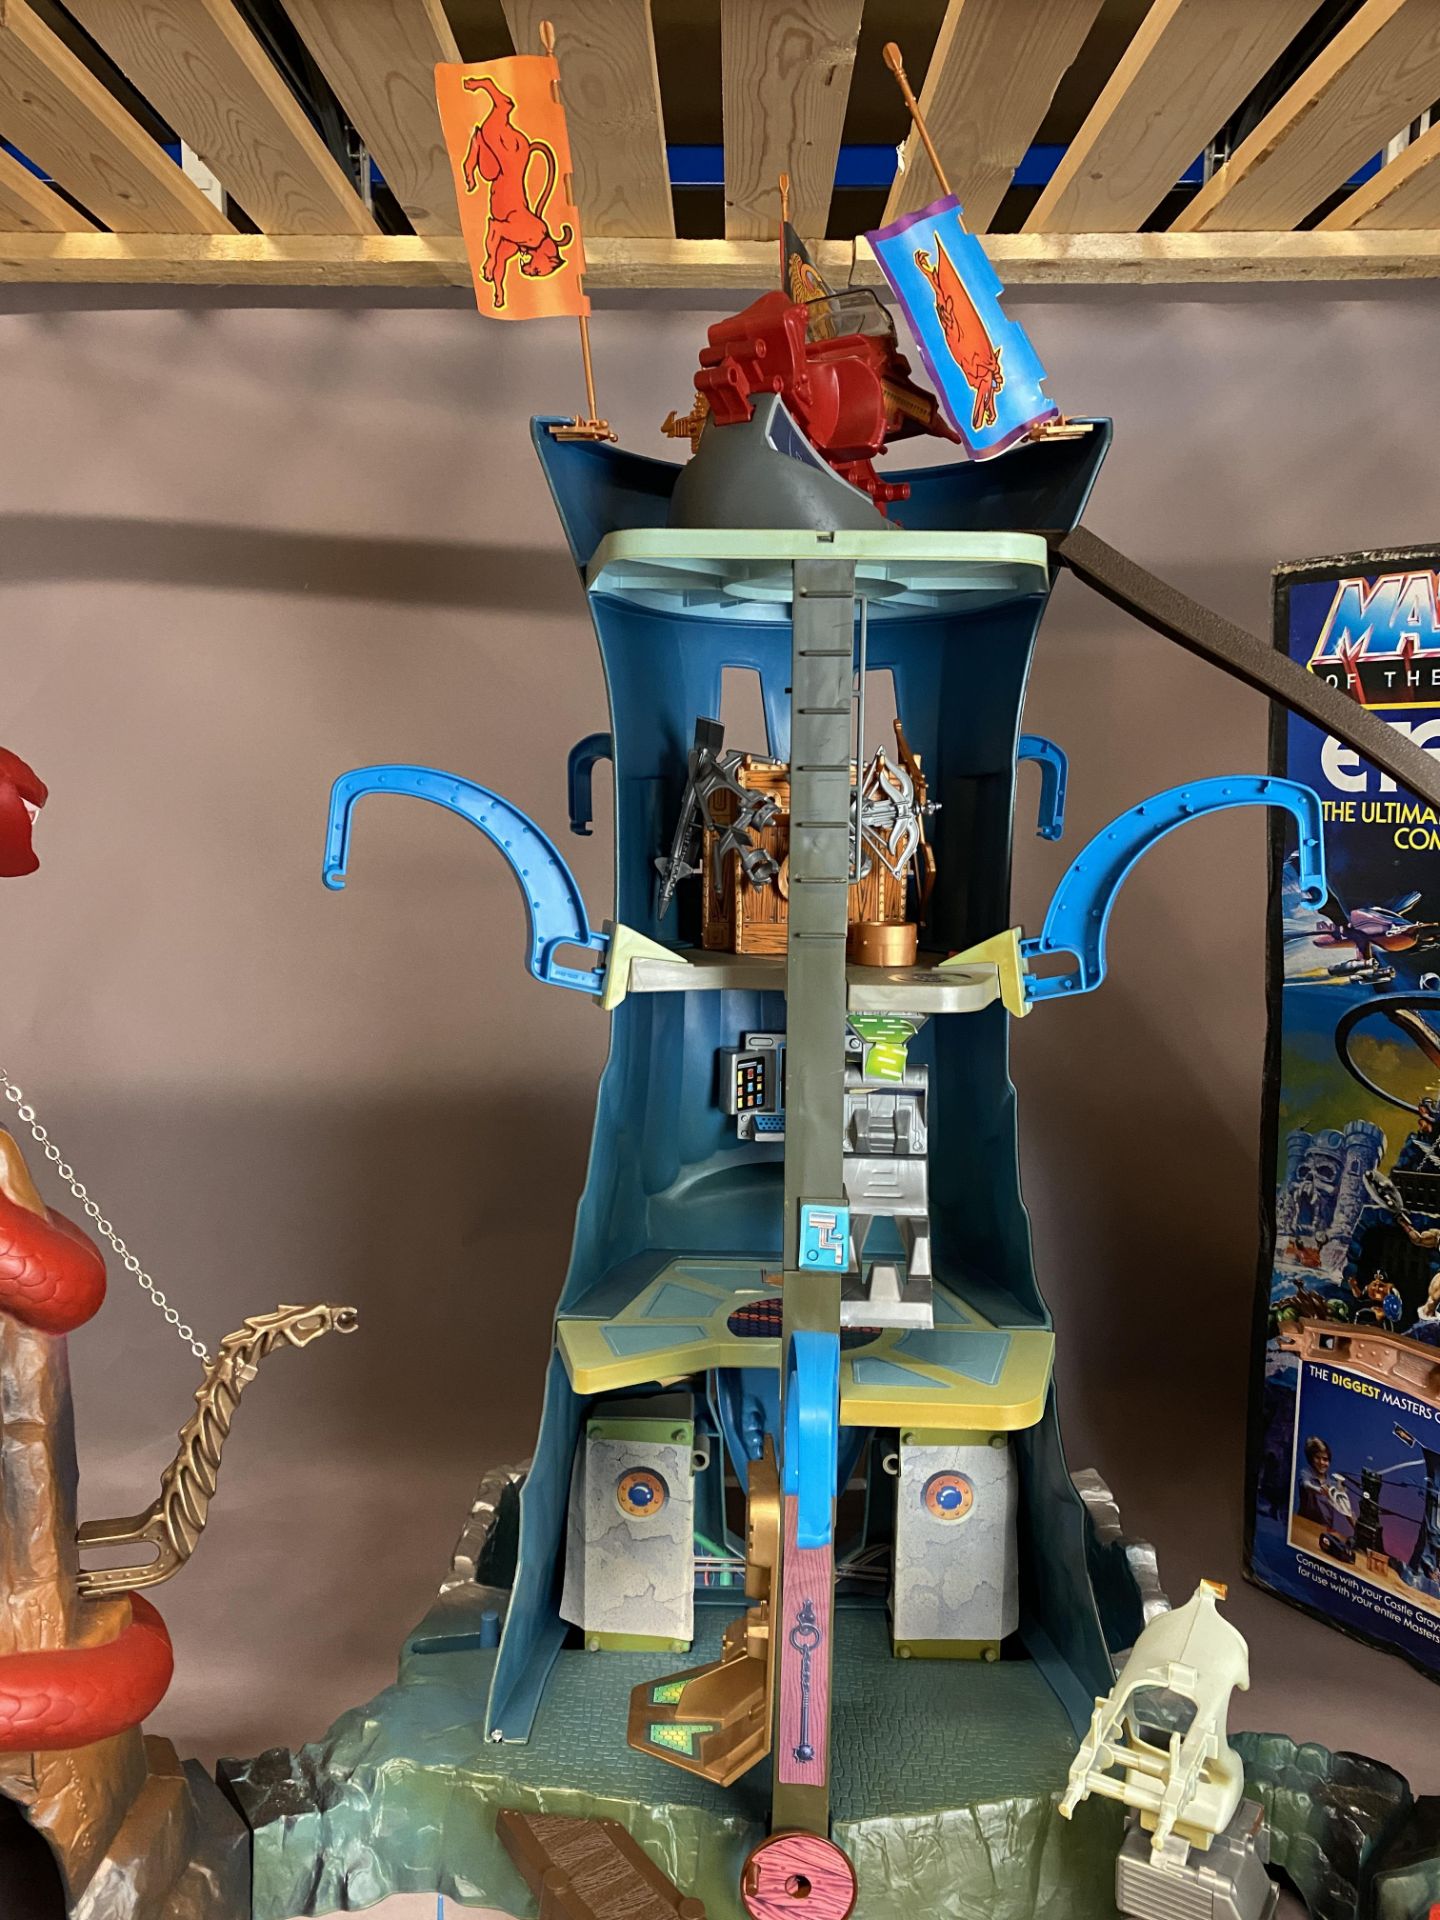 ETERNIA - Vintage Masters of the Universe Playset and Original Box (MOTU) - Appears to be complete - Image 18 of 125